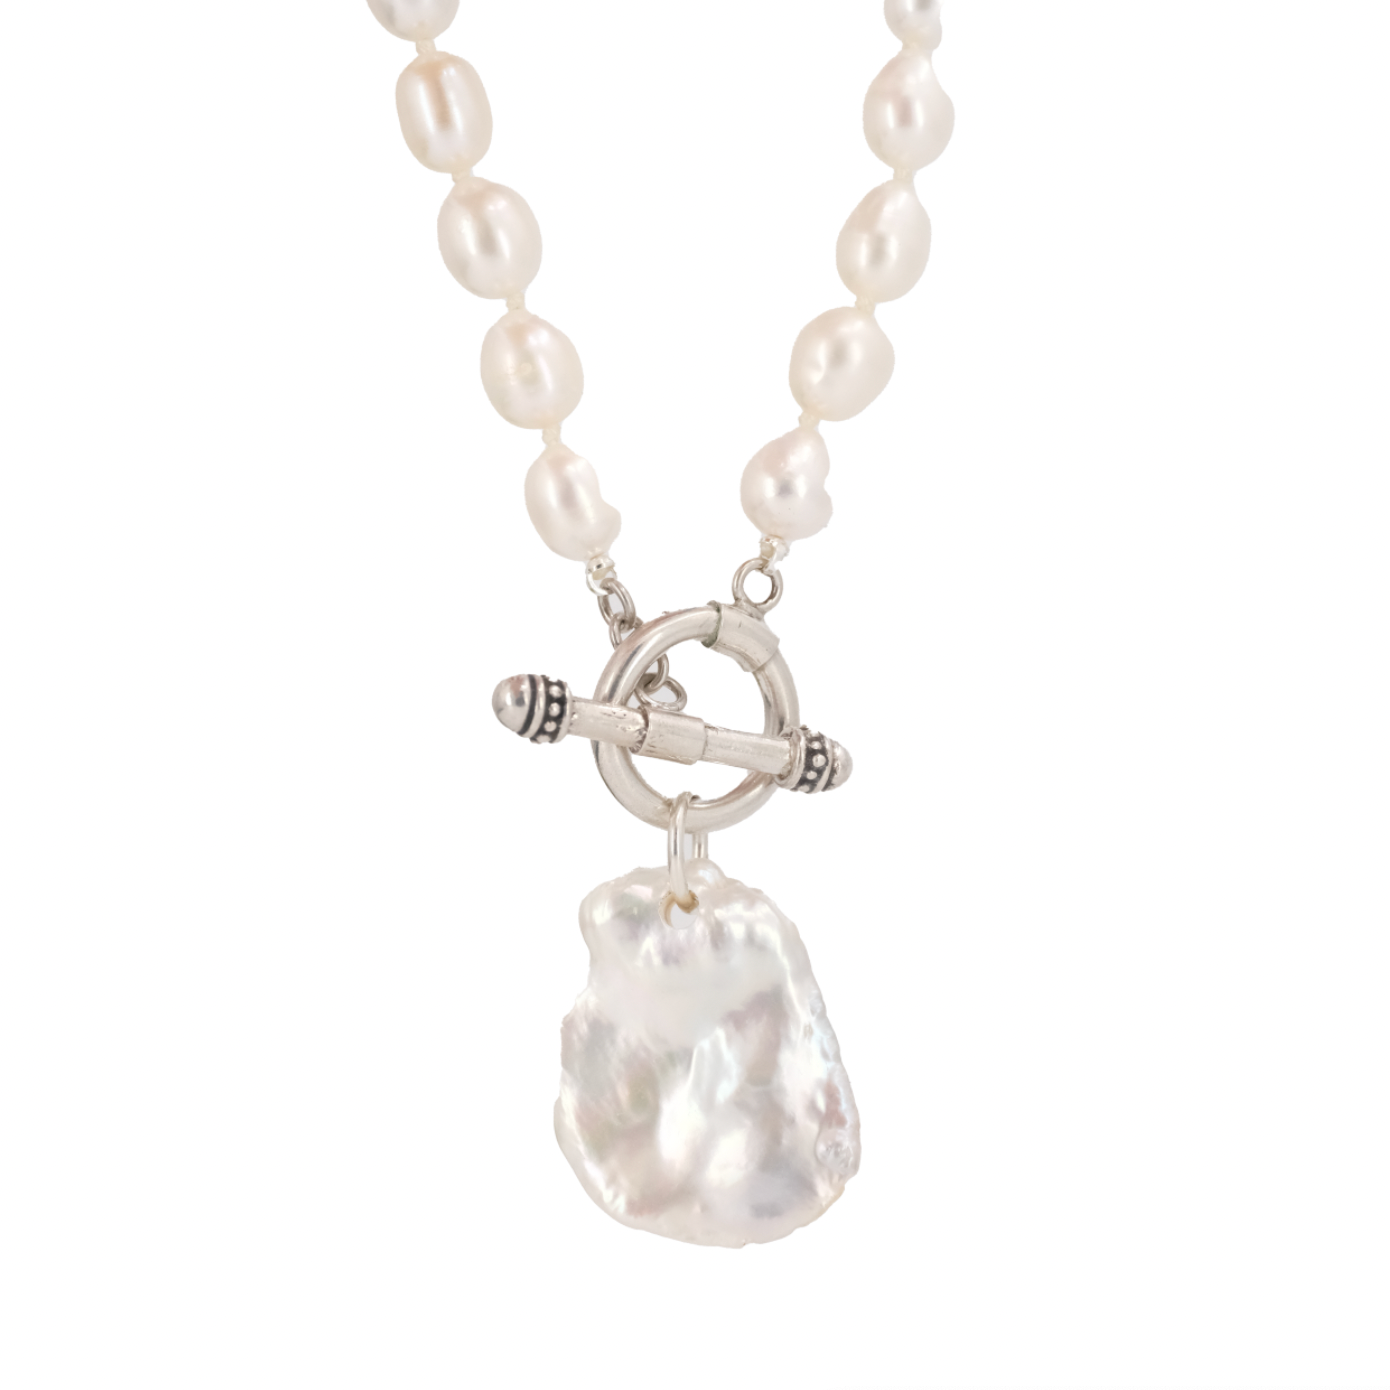 Into White Pearl + Sterling Necklace - One of a Kind